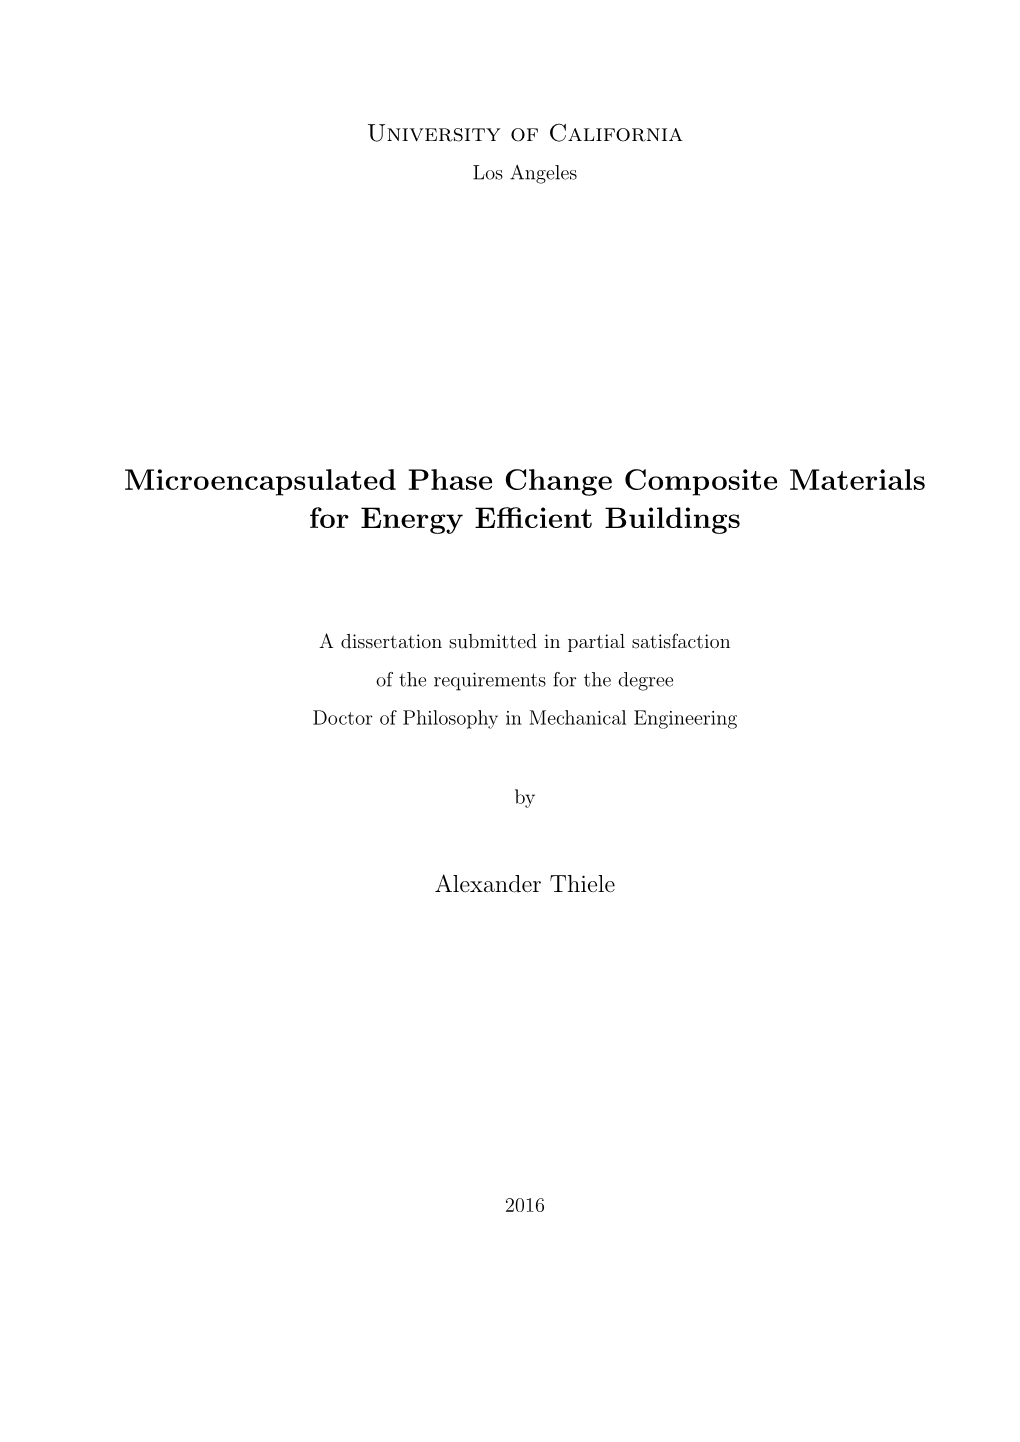 Microencapsulated Phase Change Composite Materials for Energy Eﬃcient Buildings